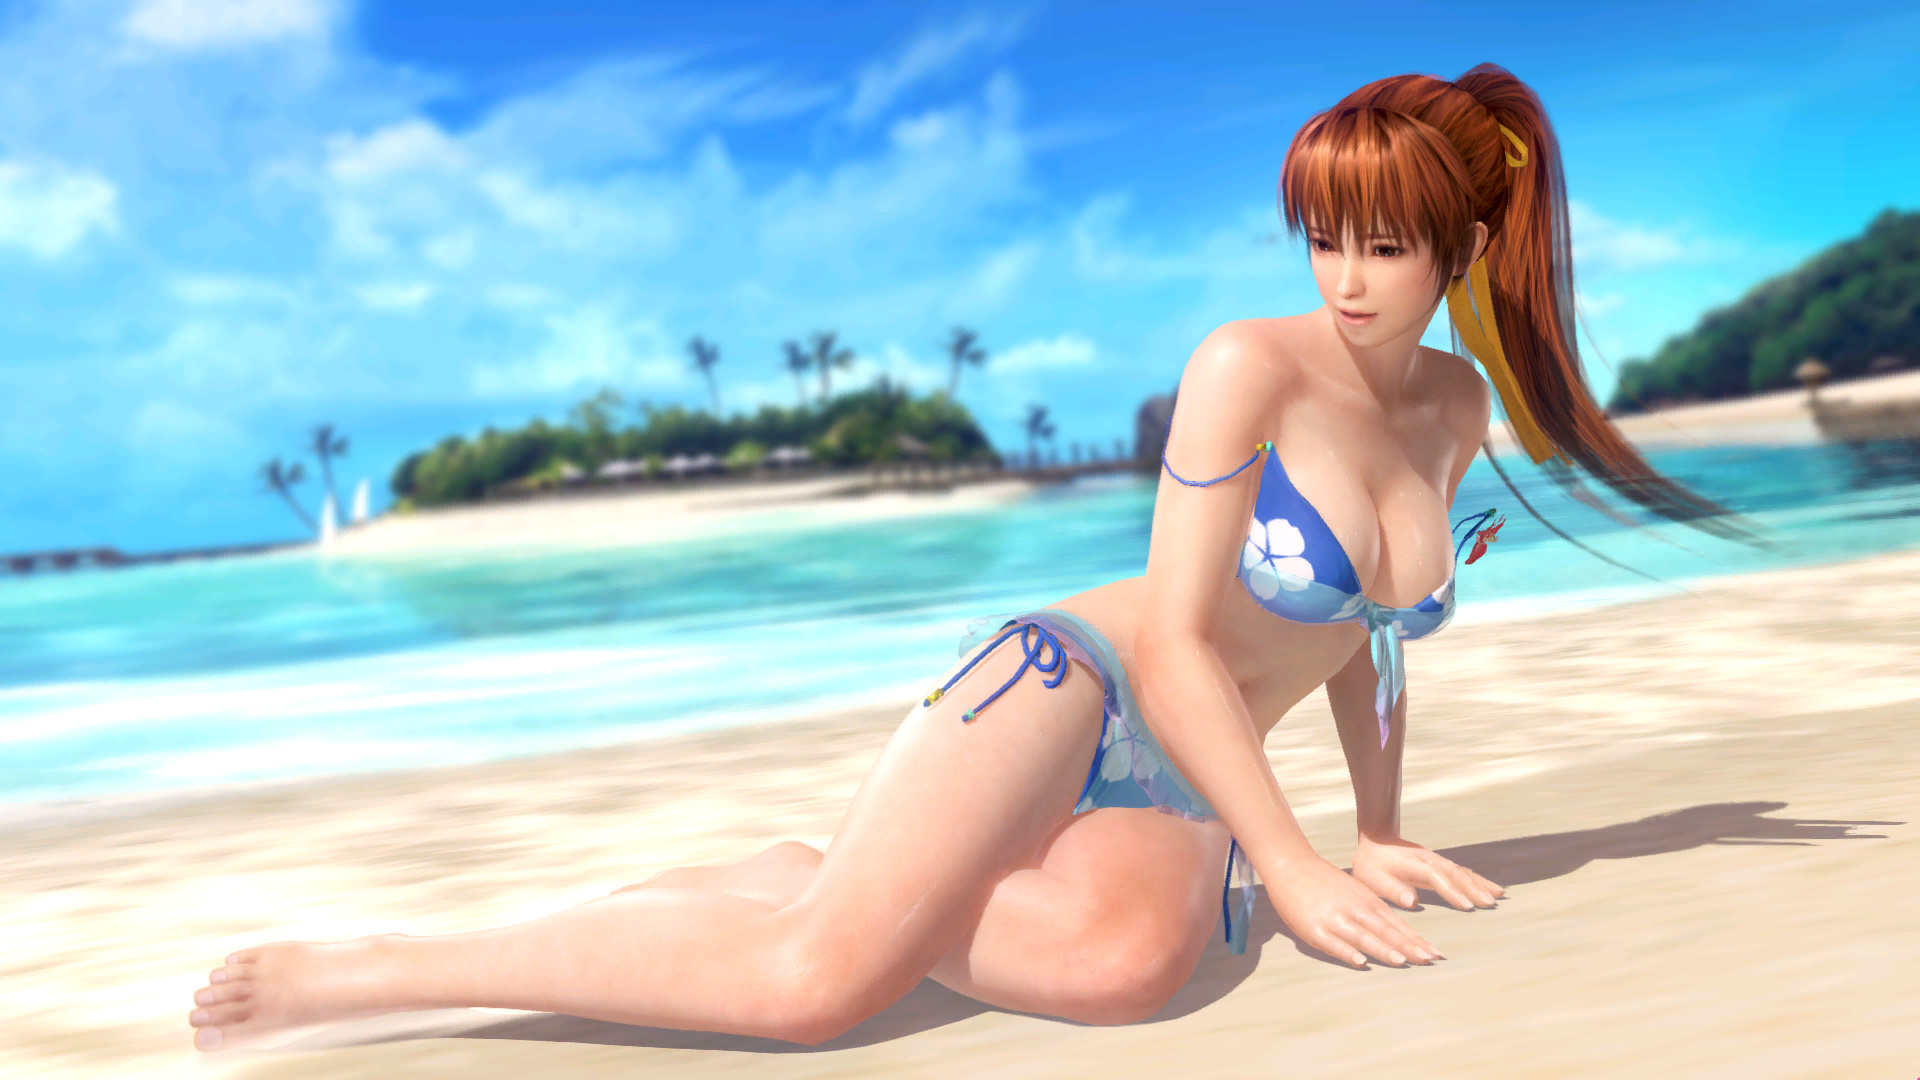 Dog or alive демо. Dead or Alive Kasumi. Касуми Dead or Alive. Касуми Dead or Alive 3д. Dead or Alive Xtreme Venus vacation.